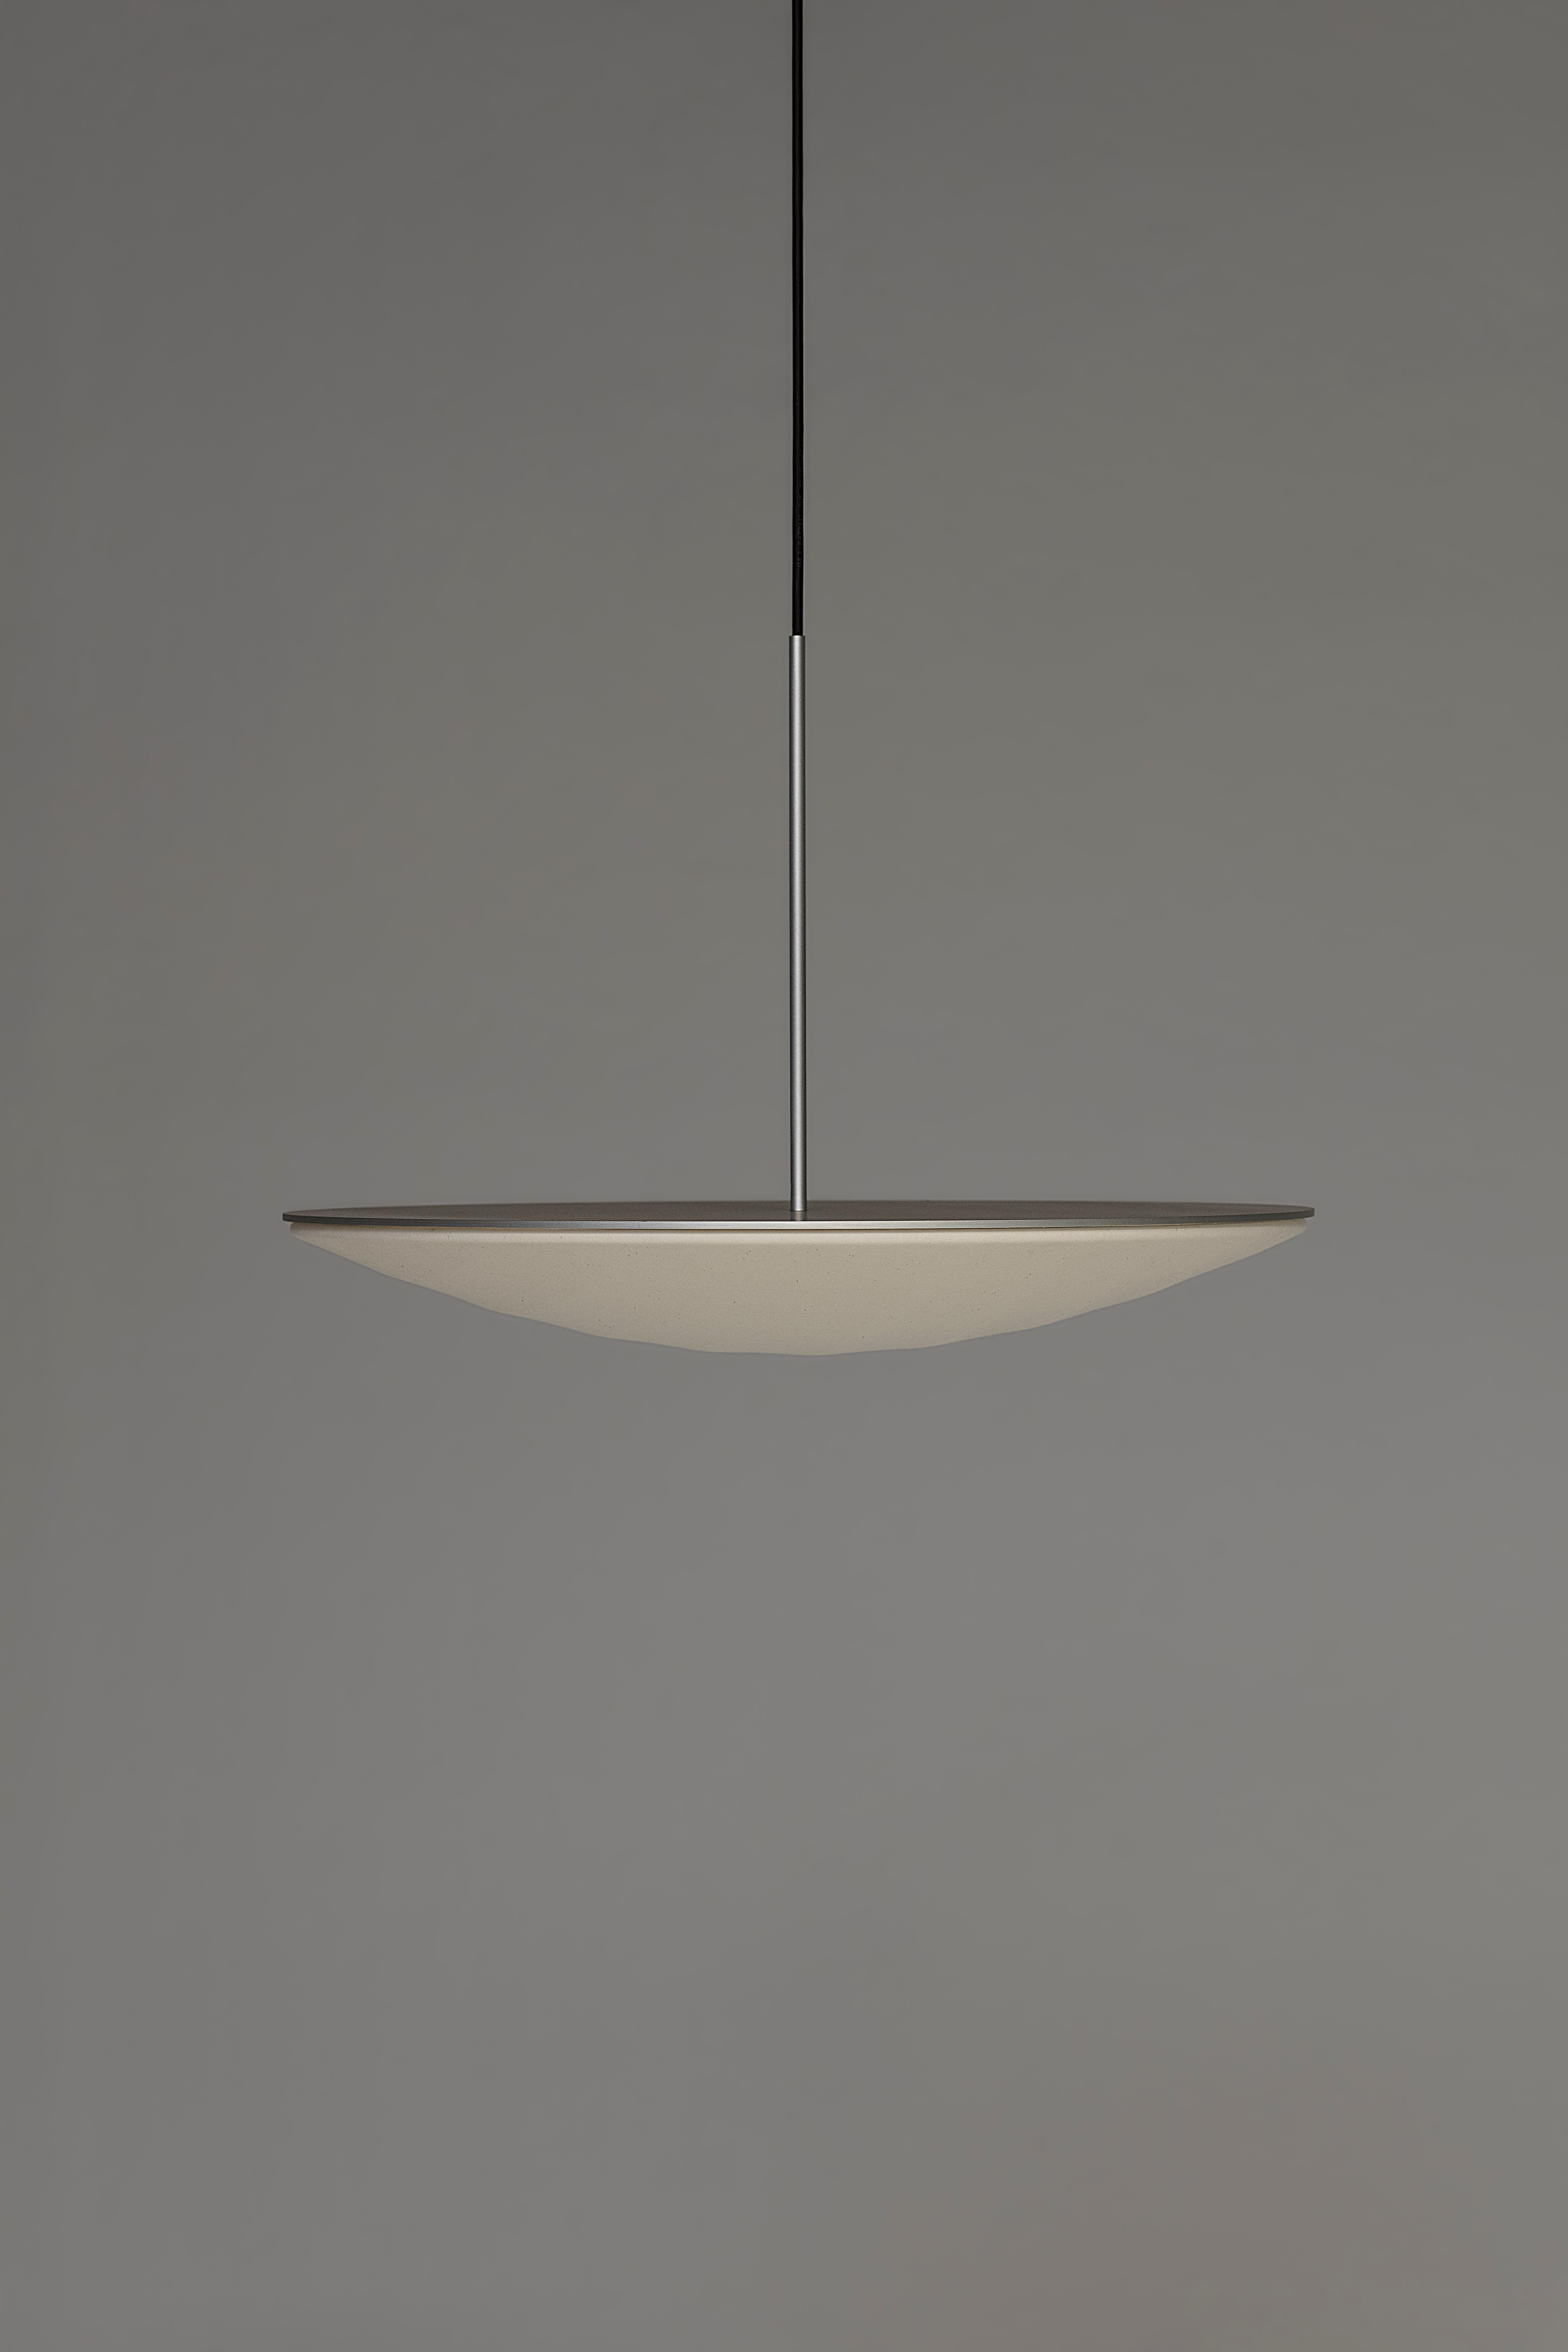 Voyage Pendant lamp by Bymars x AGO Lighting
Silver

Materials: Aluminum, Cotton fabric, PMMA 
Light Source: Integrated LED (SMD), DC
Watt. 24 W 
Color temp. 2700 / 3000K
Cable Length: 3m 

Dimensions:
H. 40 cm x D. 56.3 cm 

VOYAGE the